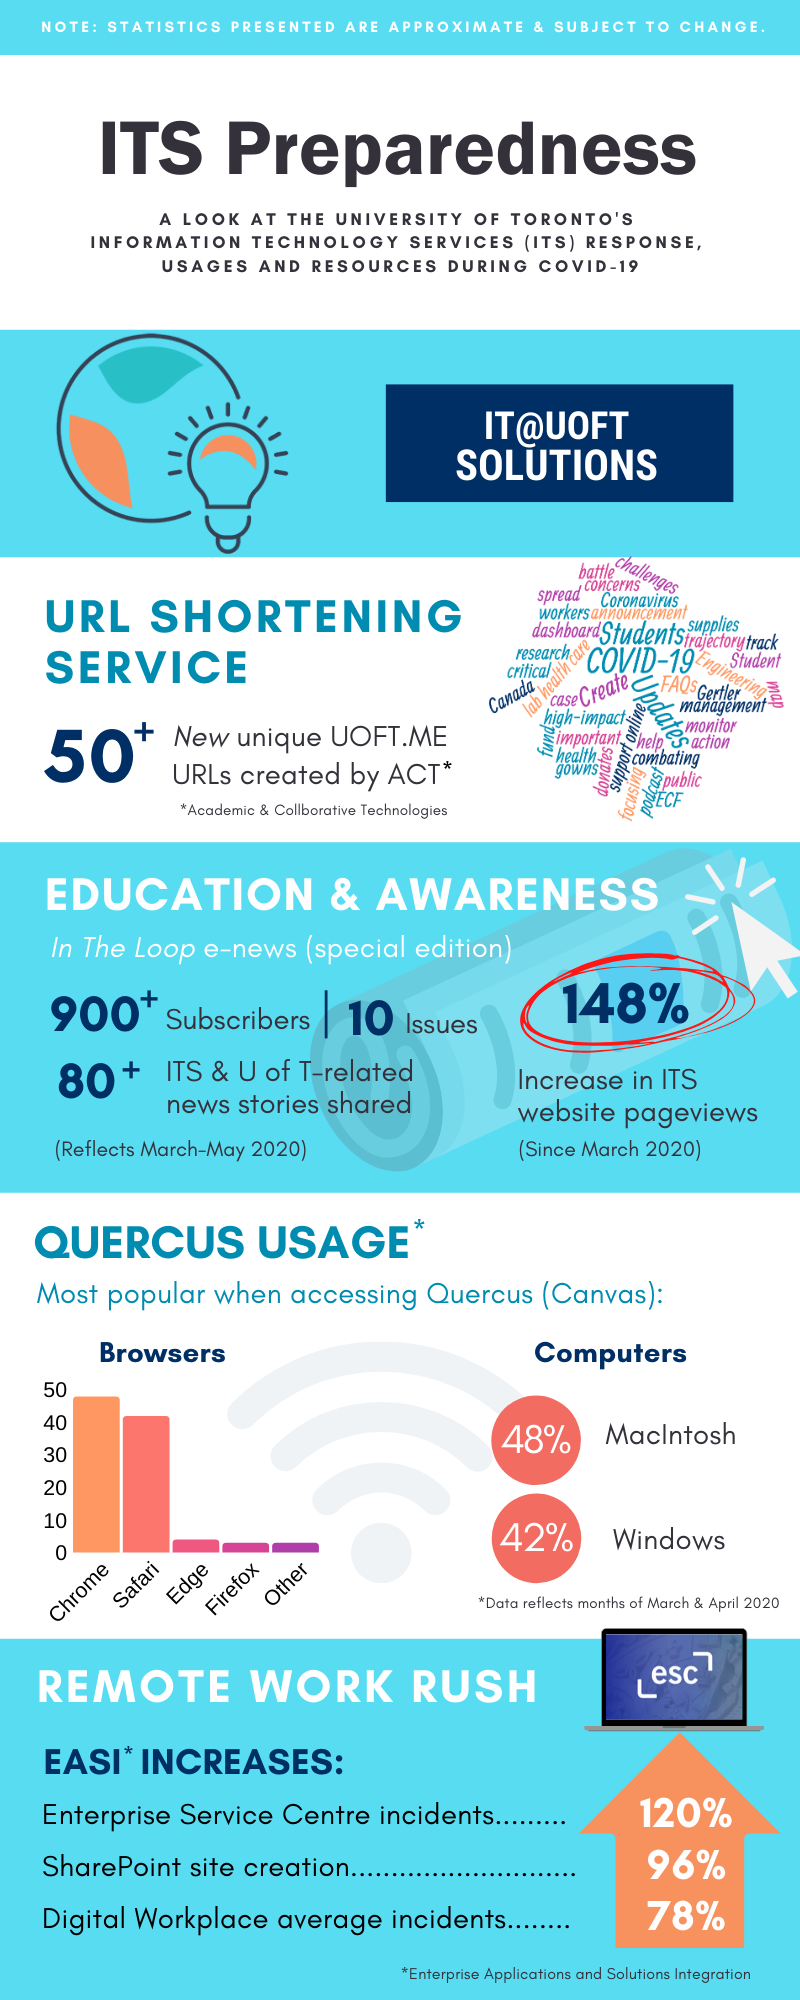 Click here to view the infographics on IT@UofT Solutions